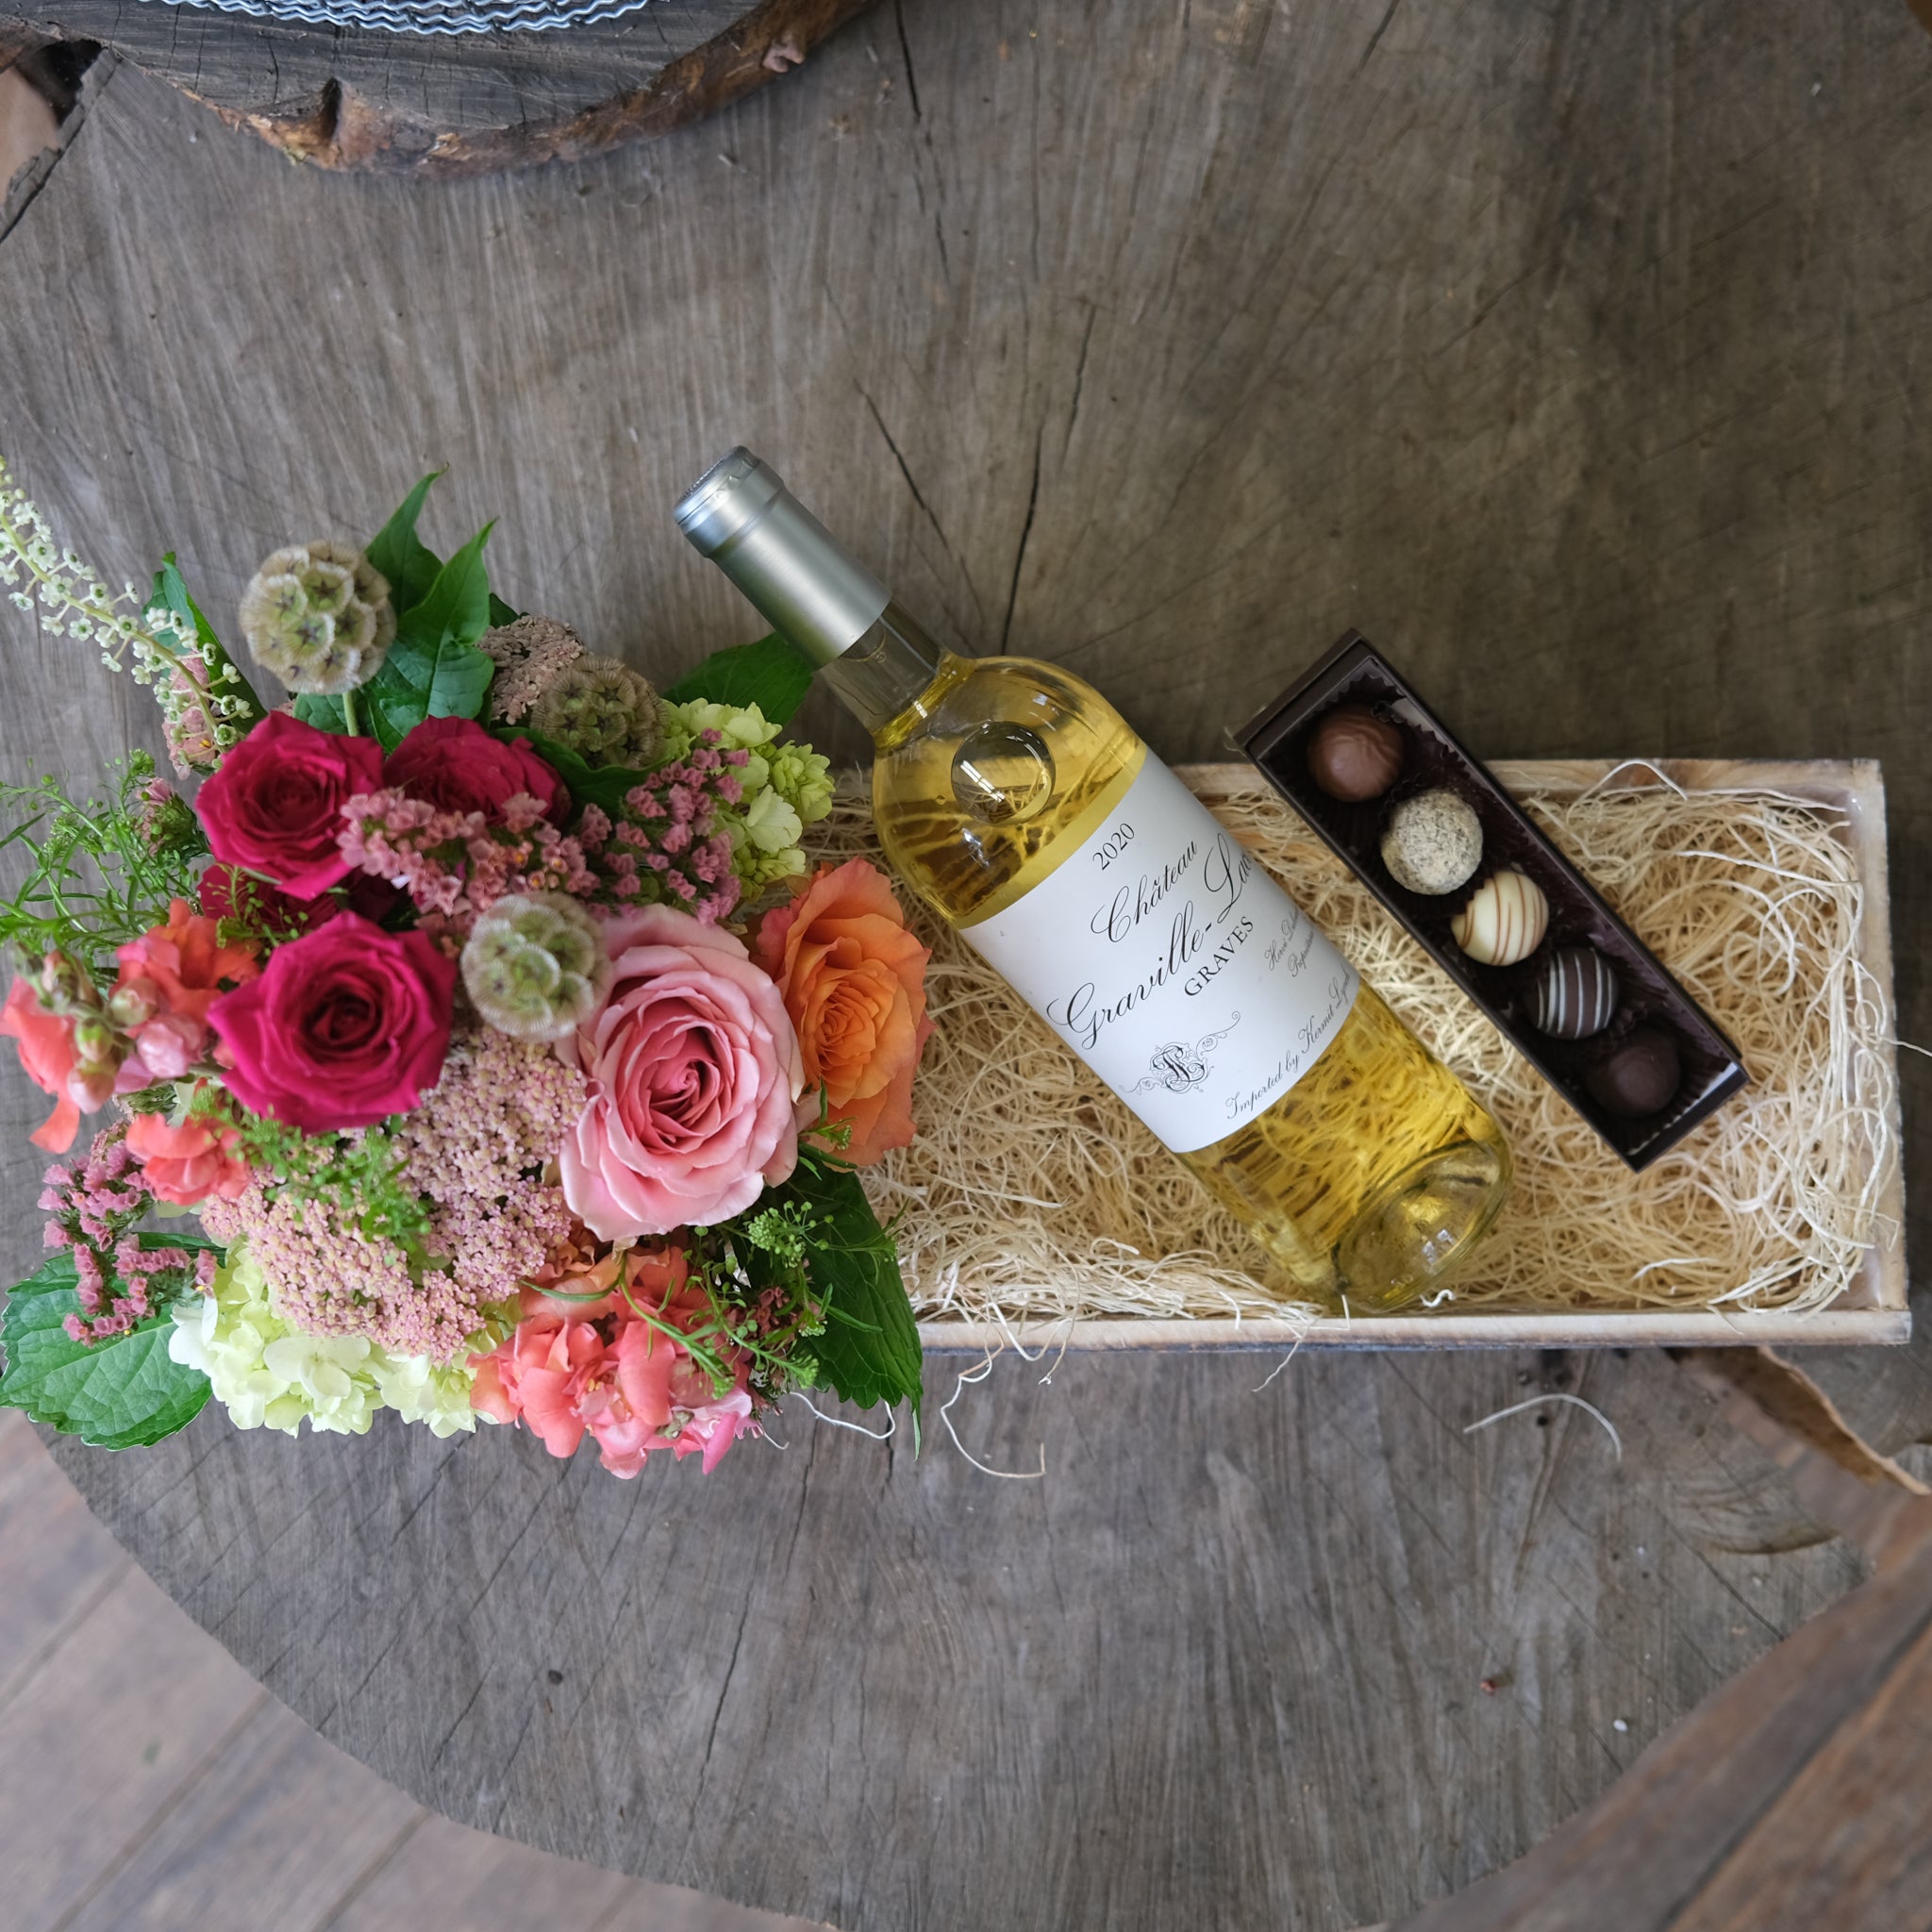 Oblong wooden crate featuring a bottle of white wine, a box of five truffles, and a warm, compact flower arrangement.